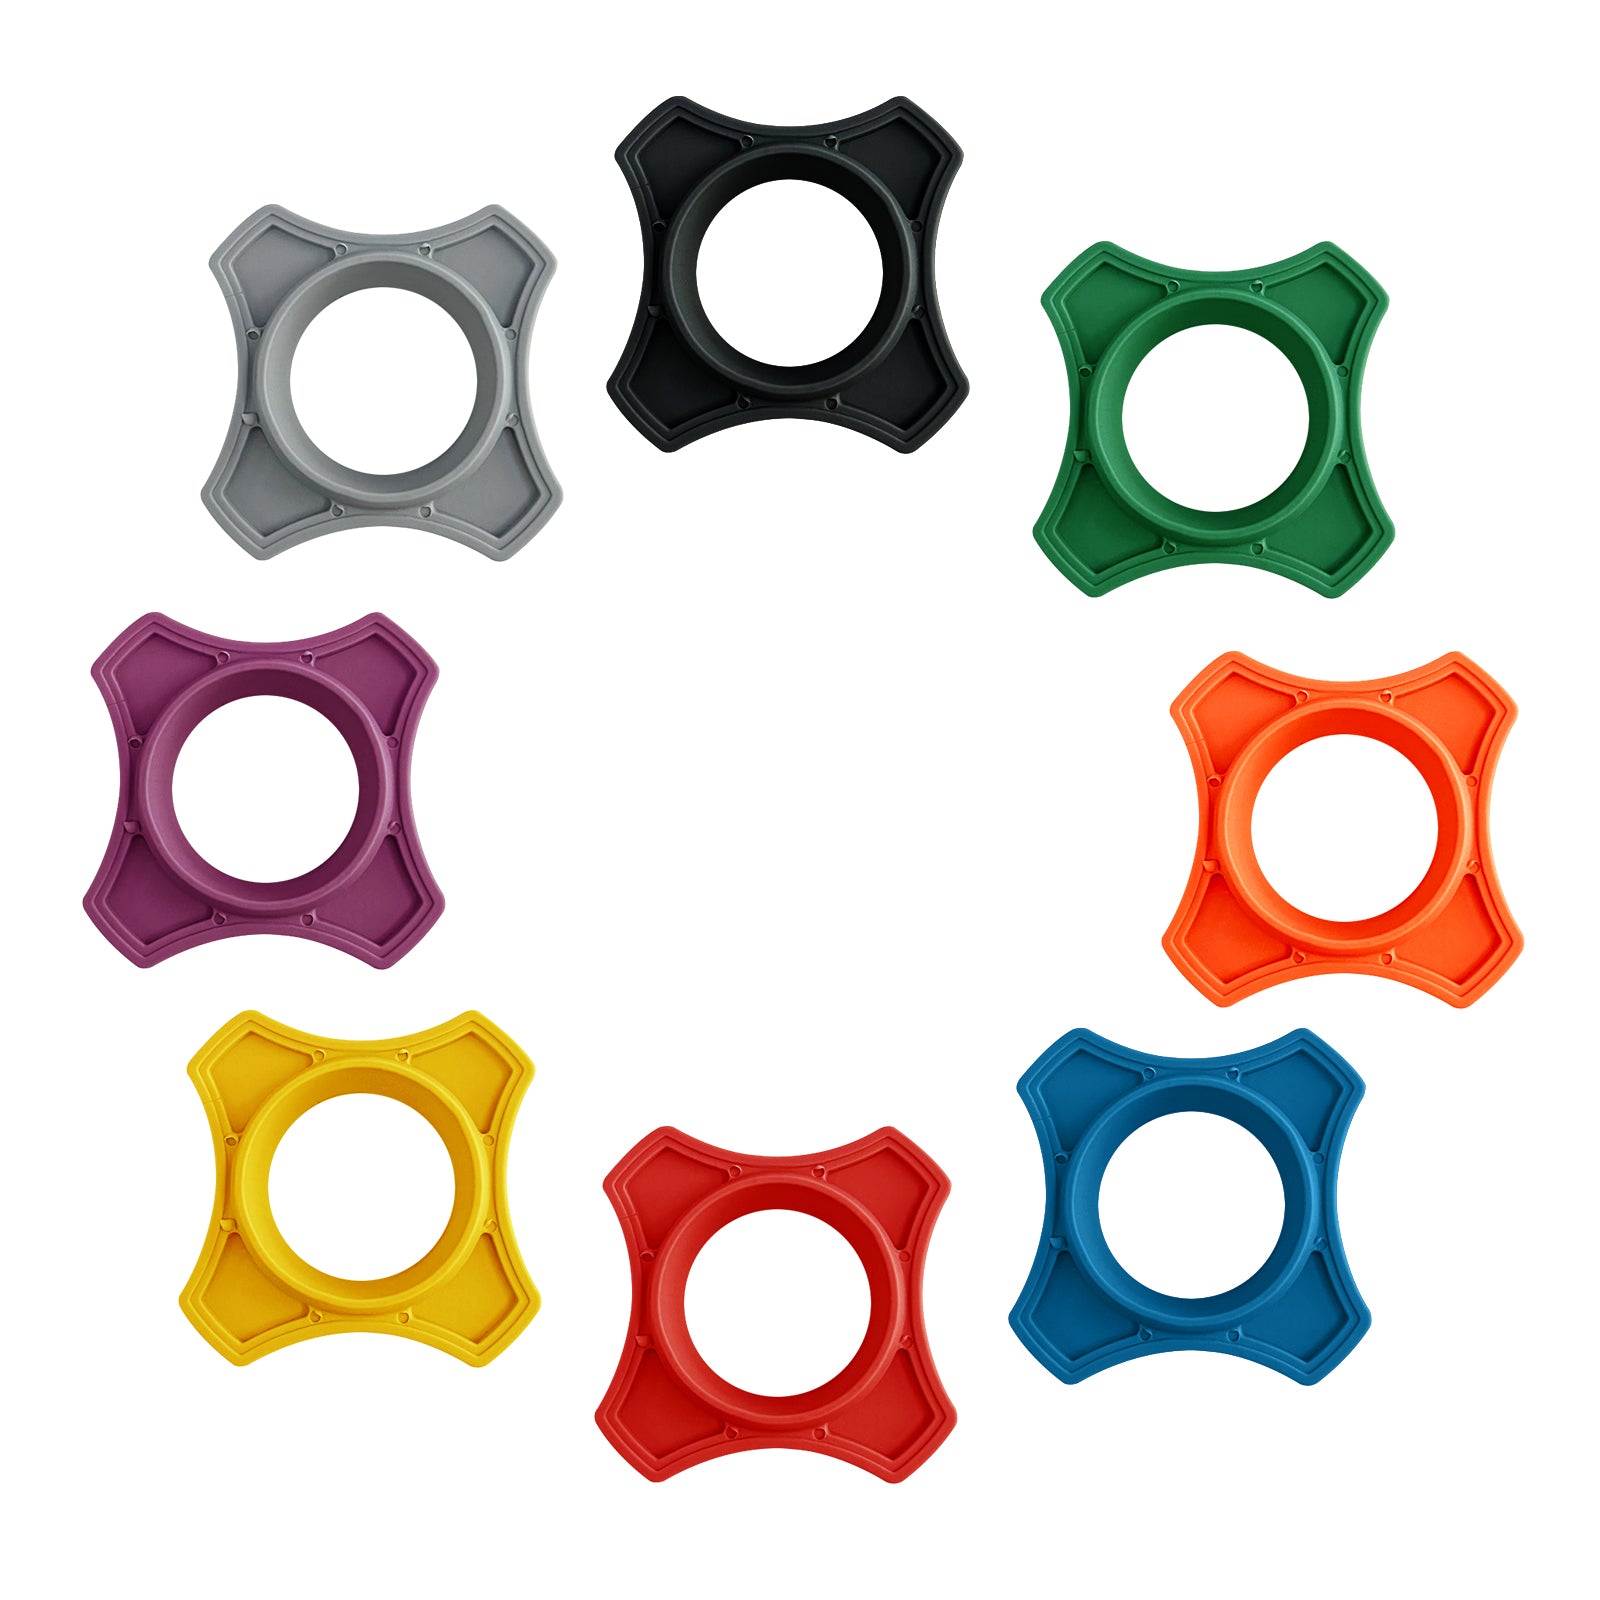 Phenyx Pro Assorted Color Rubber Anti-rolling Protection Rings (Pack of 8)